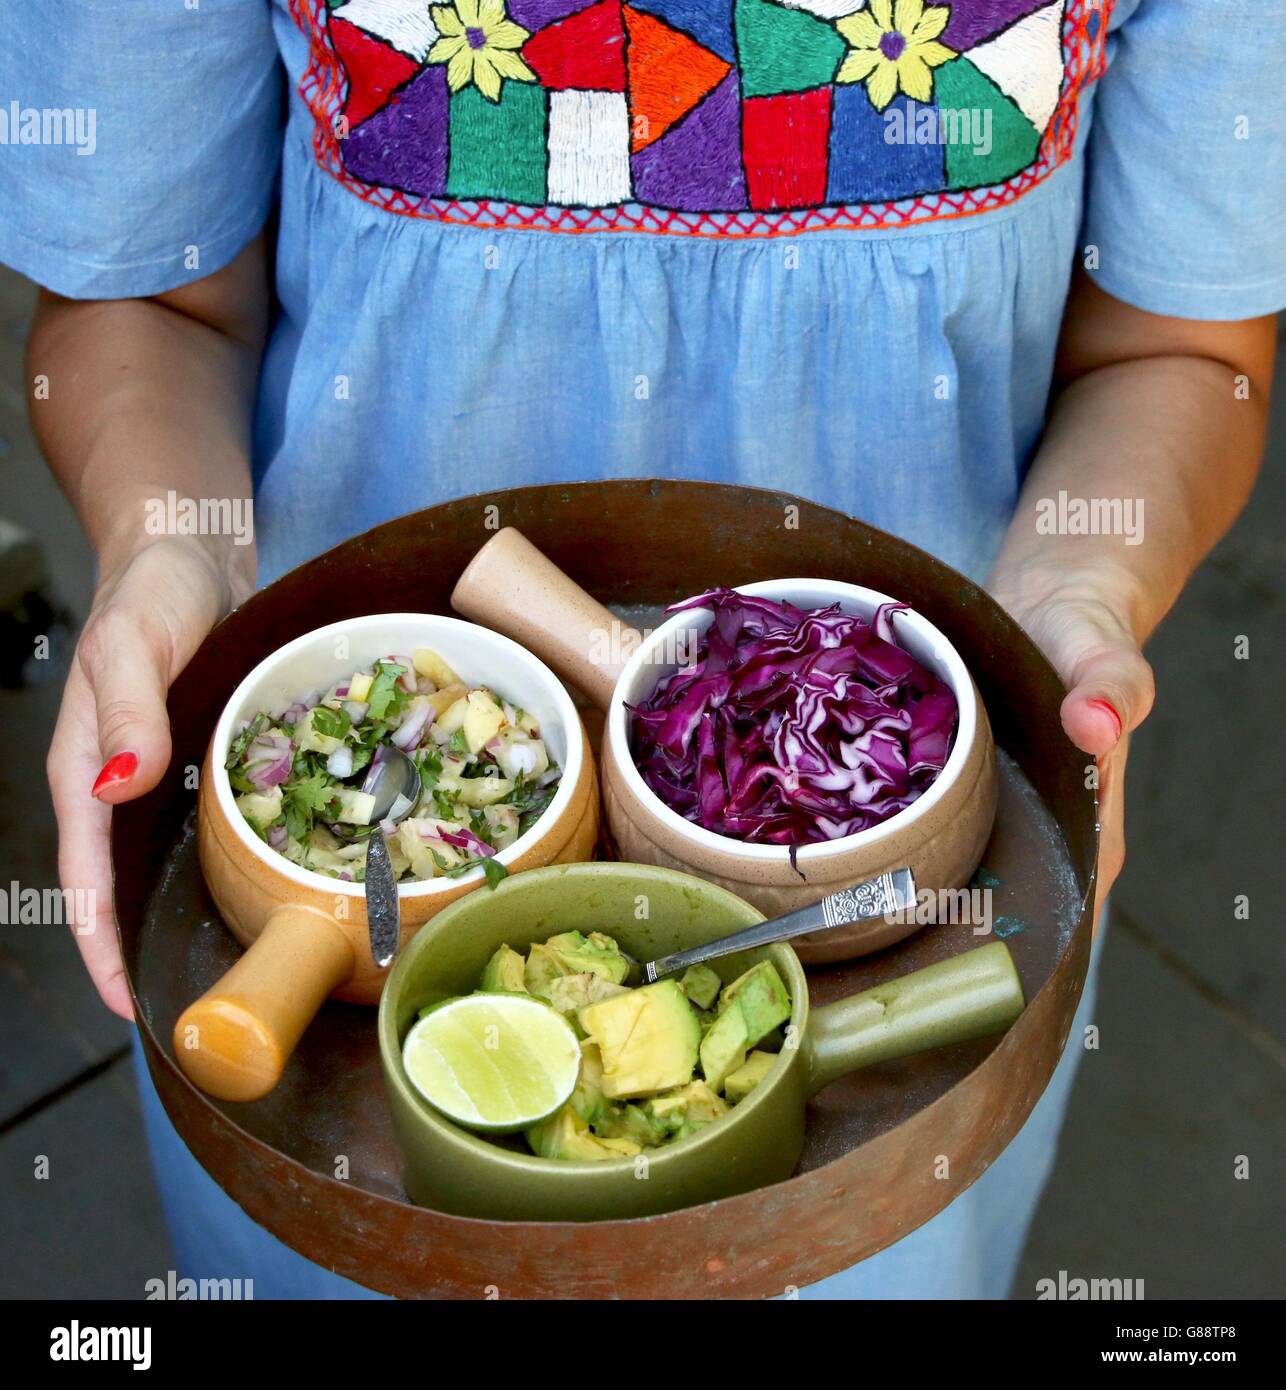 Woman serving selection of mexican salsa Stock Photo